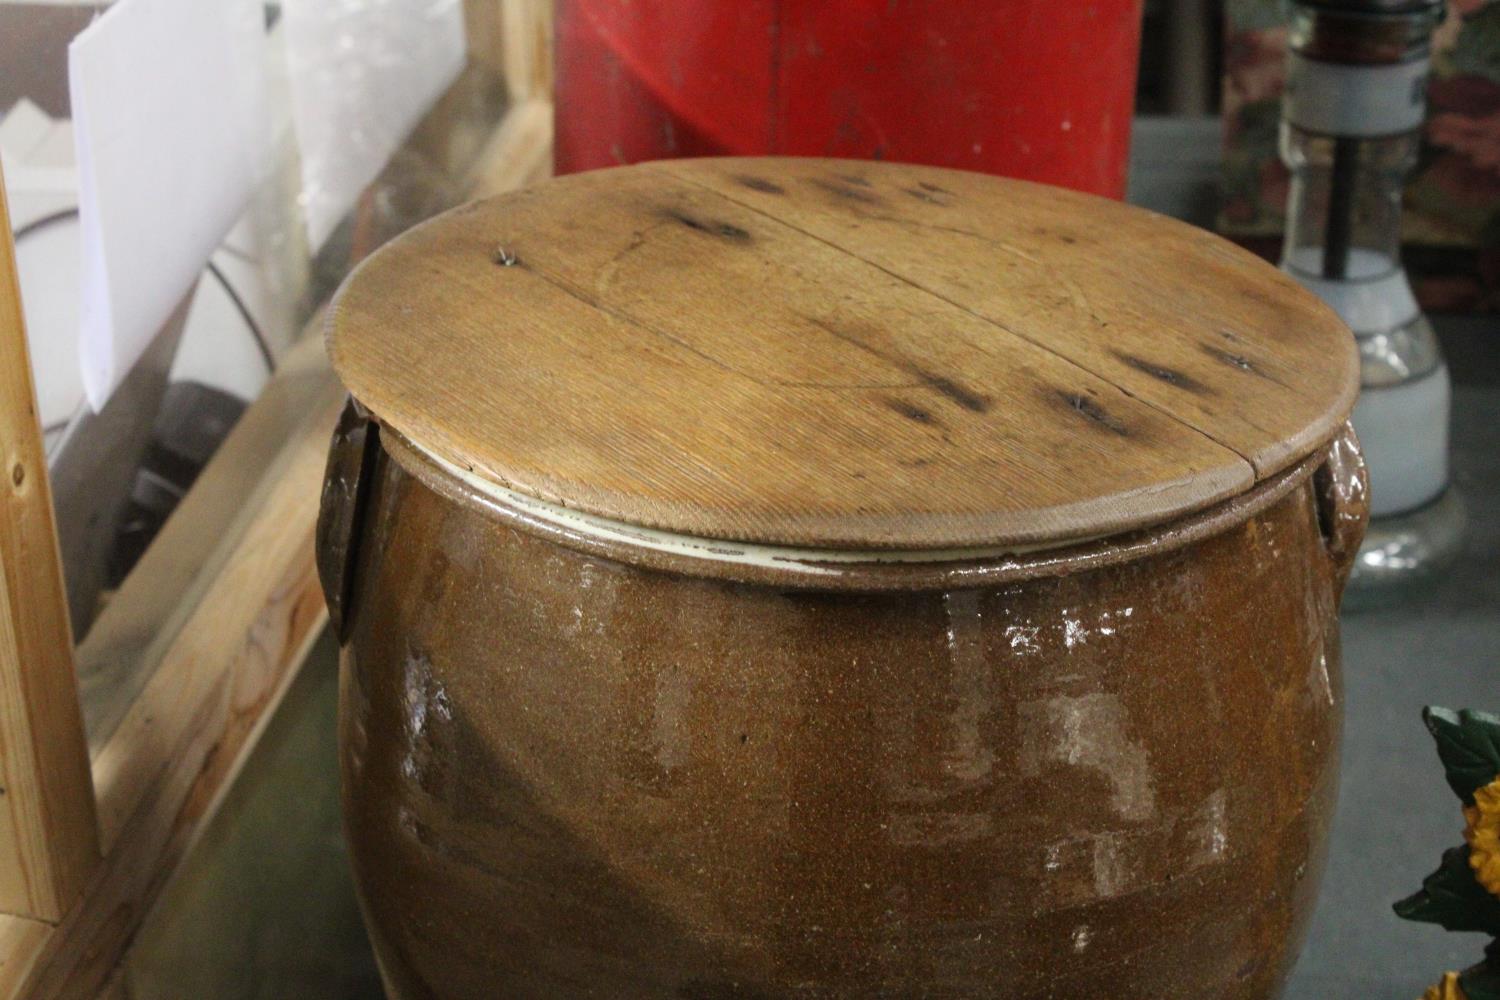 A LARGE HEAVY STONEWARE POT WITH A WOODEN LID, HEIGHT 38CM, DIAMETER 32CM - Image 2 of 4